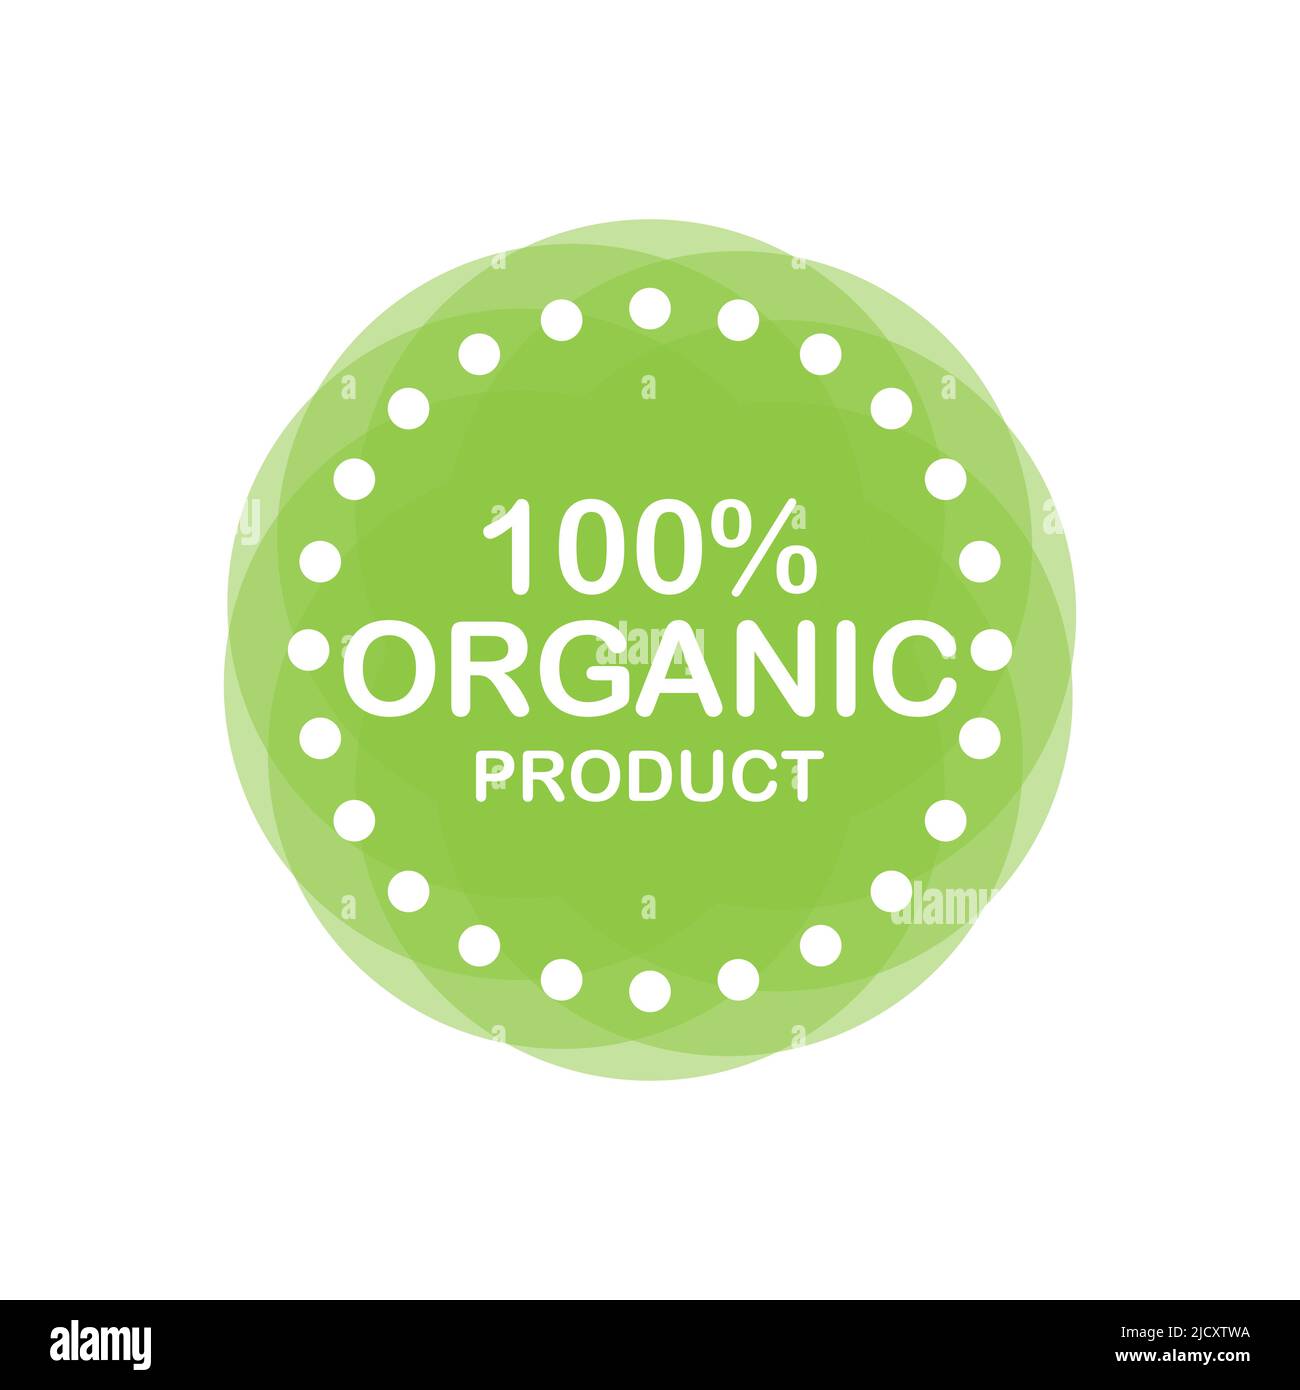 Grunge office label with the text 100% organic product. Natural health food. Stock Vector